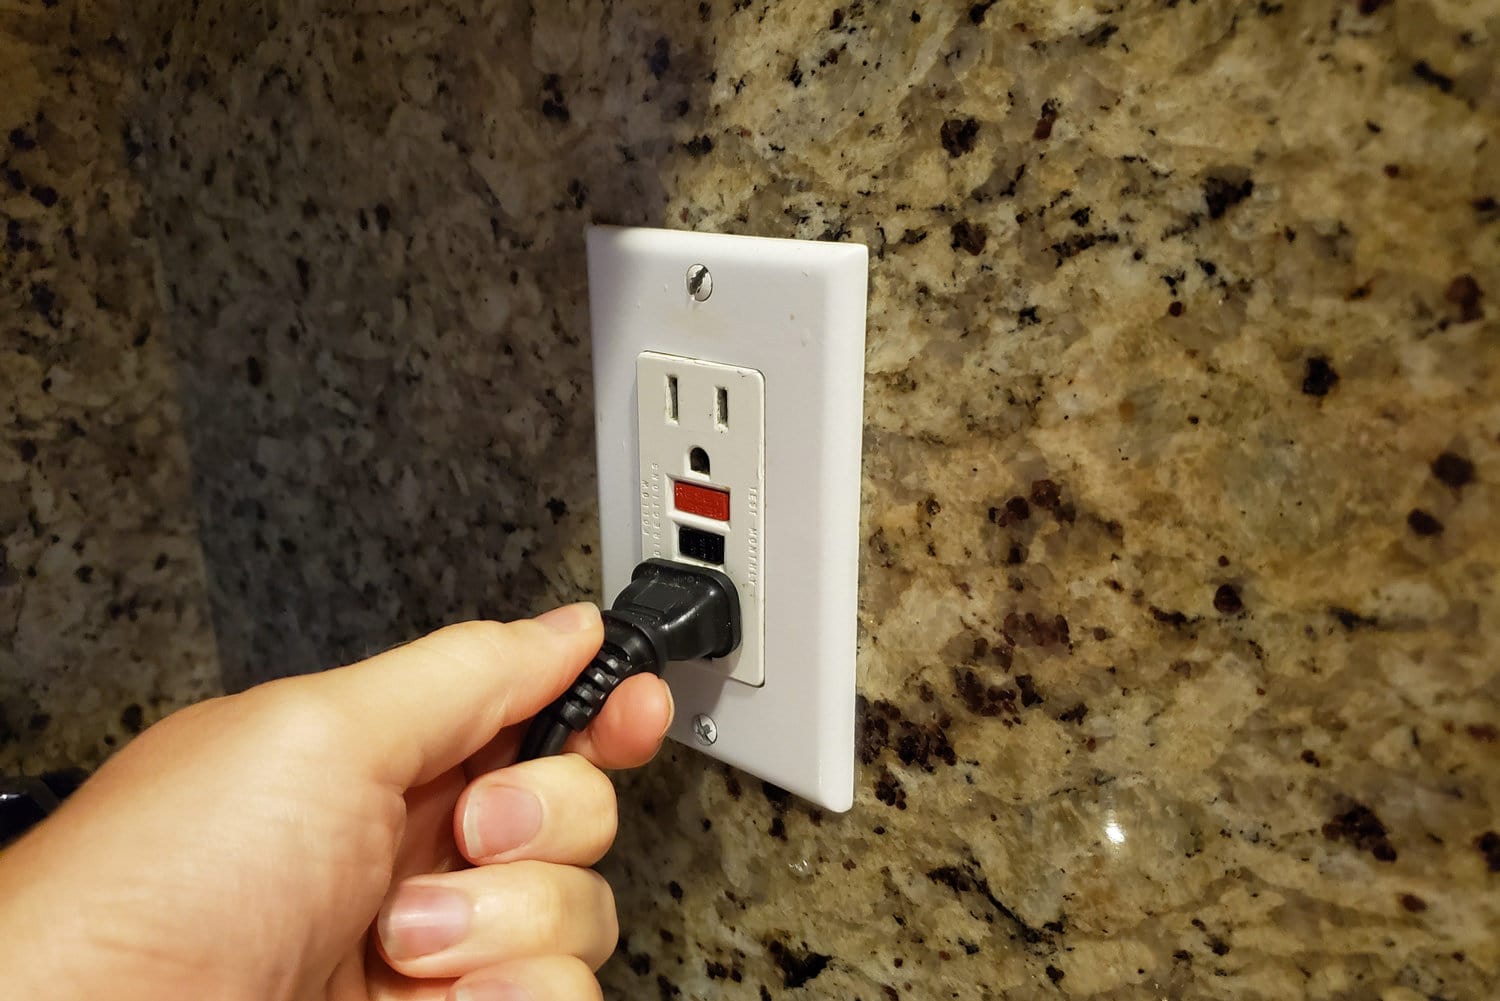 Close-up, personal perspective image of human hand of a man plugging an electrical cord into a Ground Fault Circuit Interrupter (GFCI) electrical outlet on the wall in a domestic room